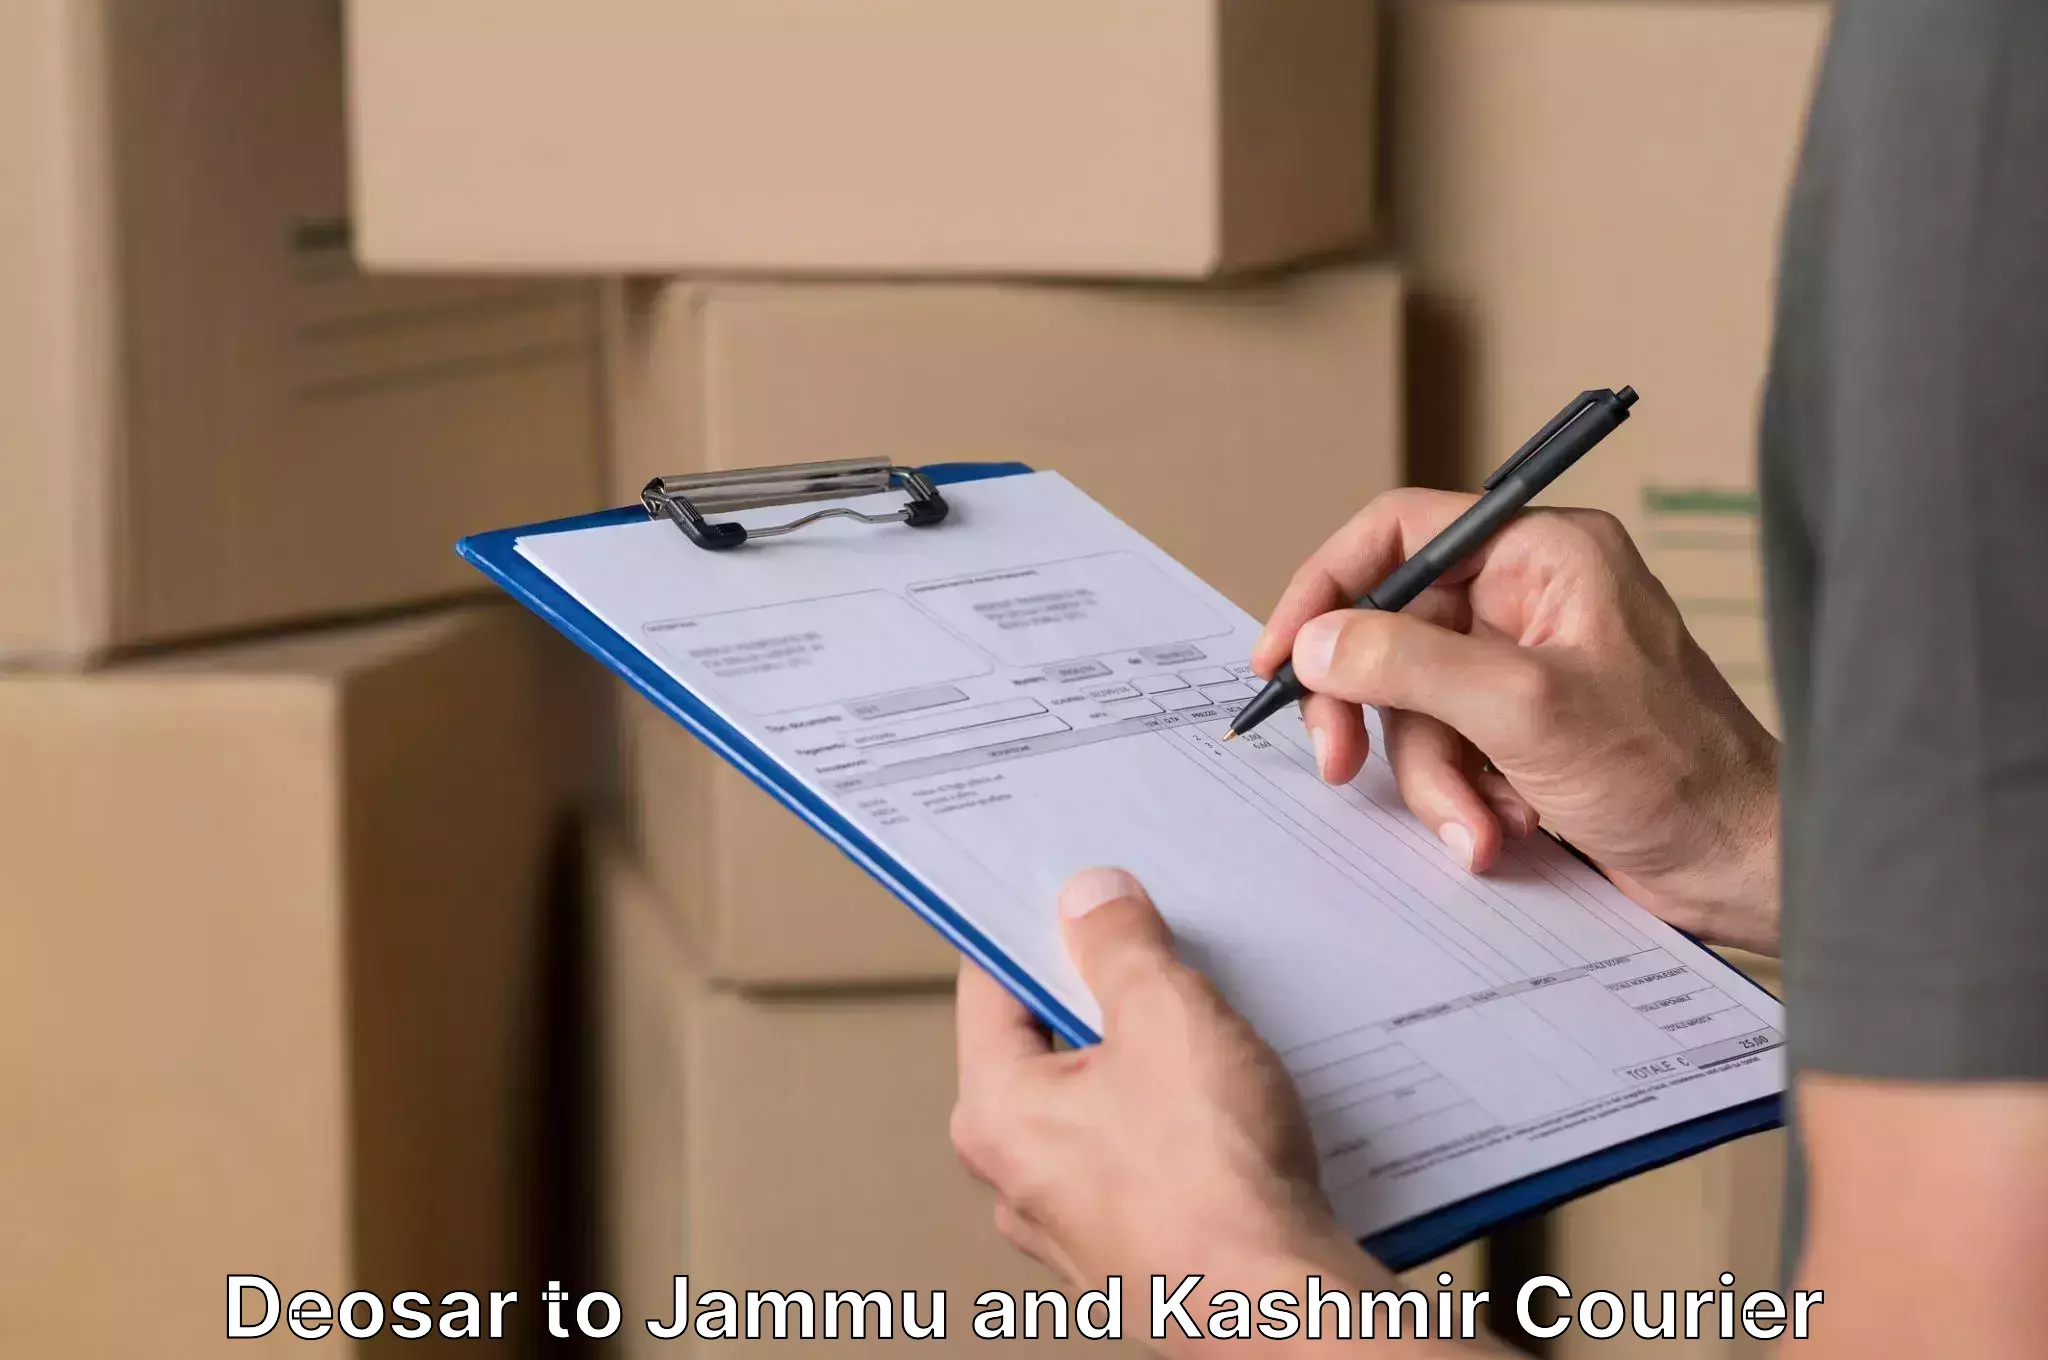 Furniture transport solutions in Deosar to Jammu